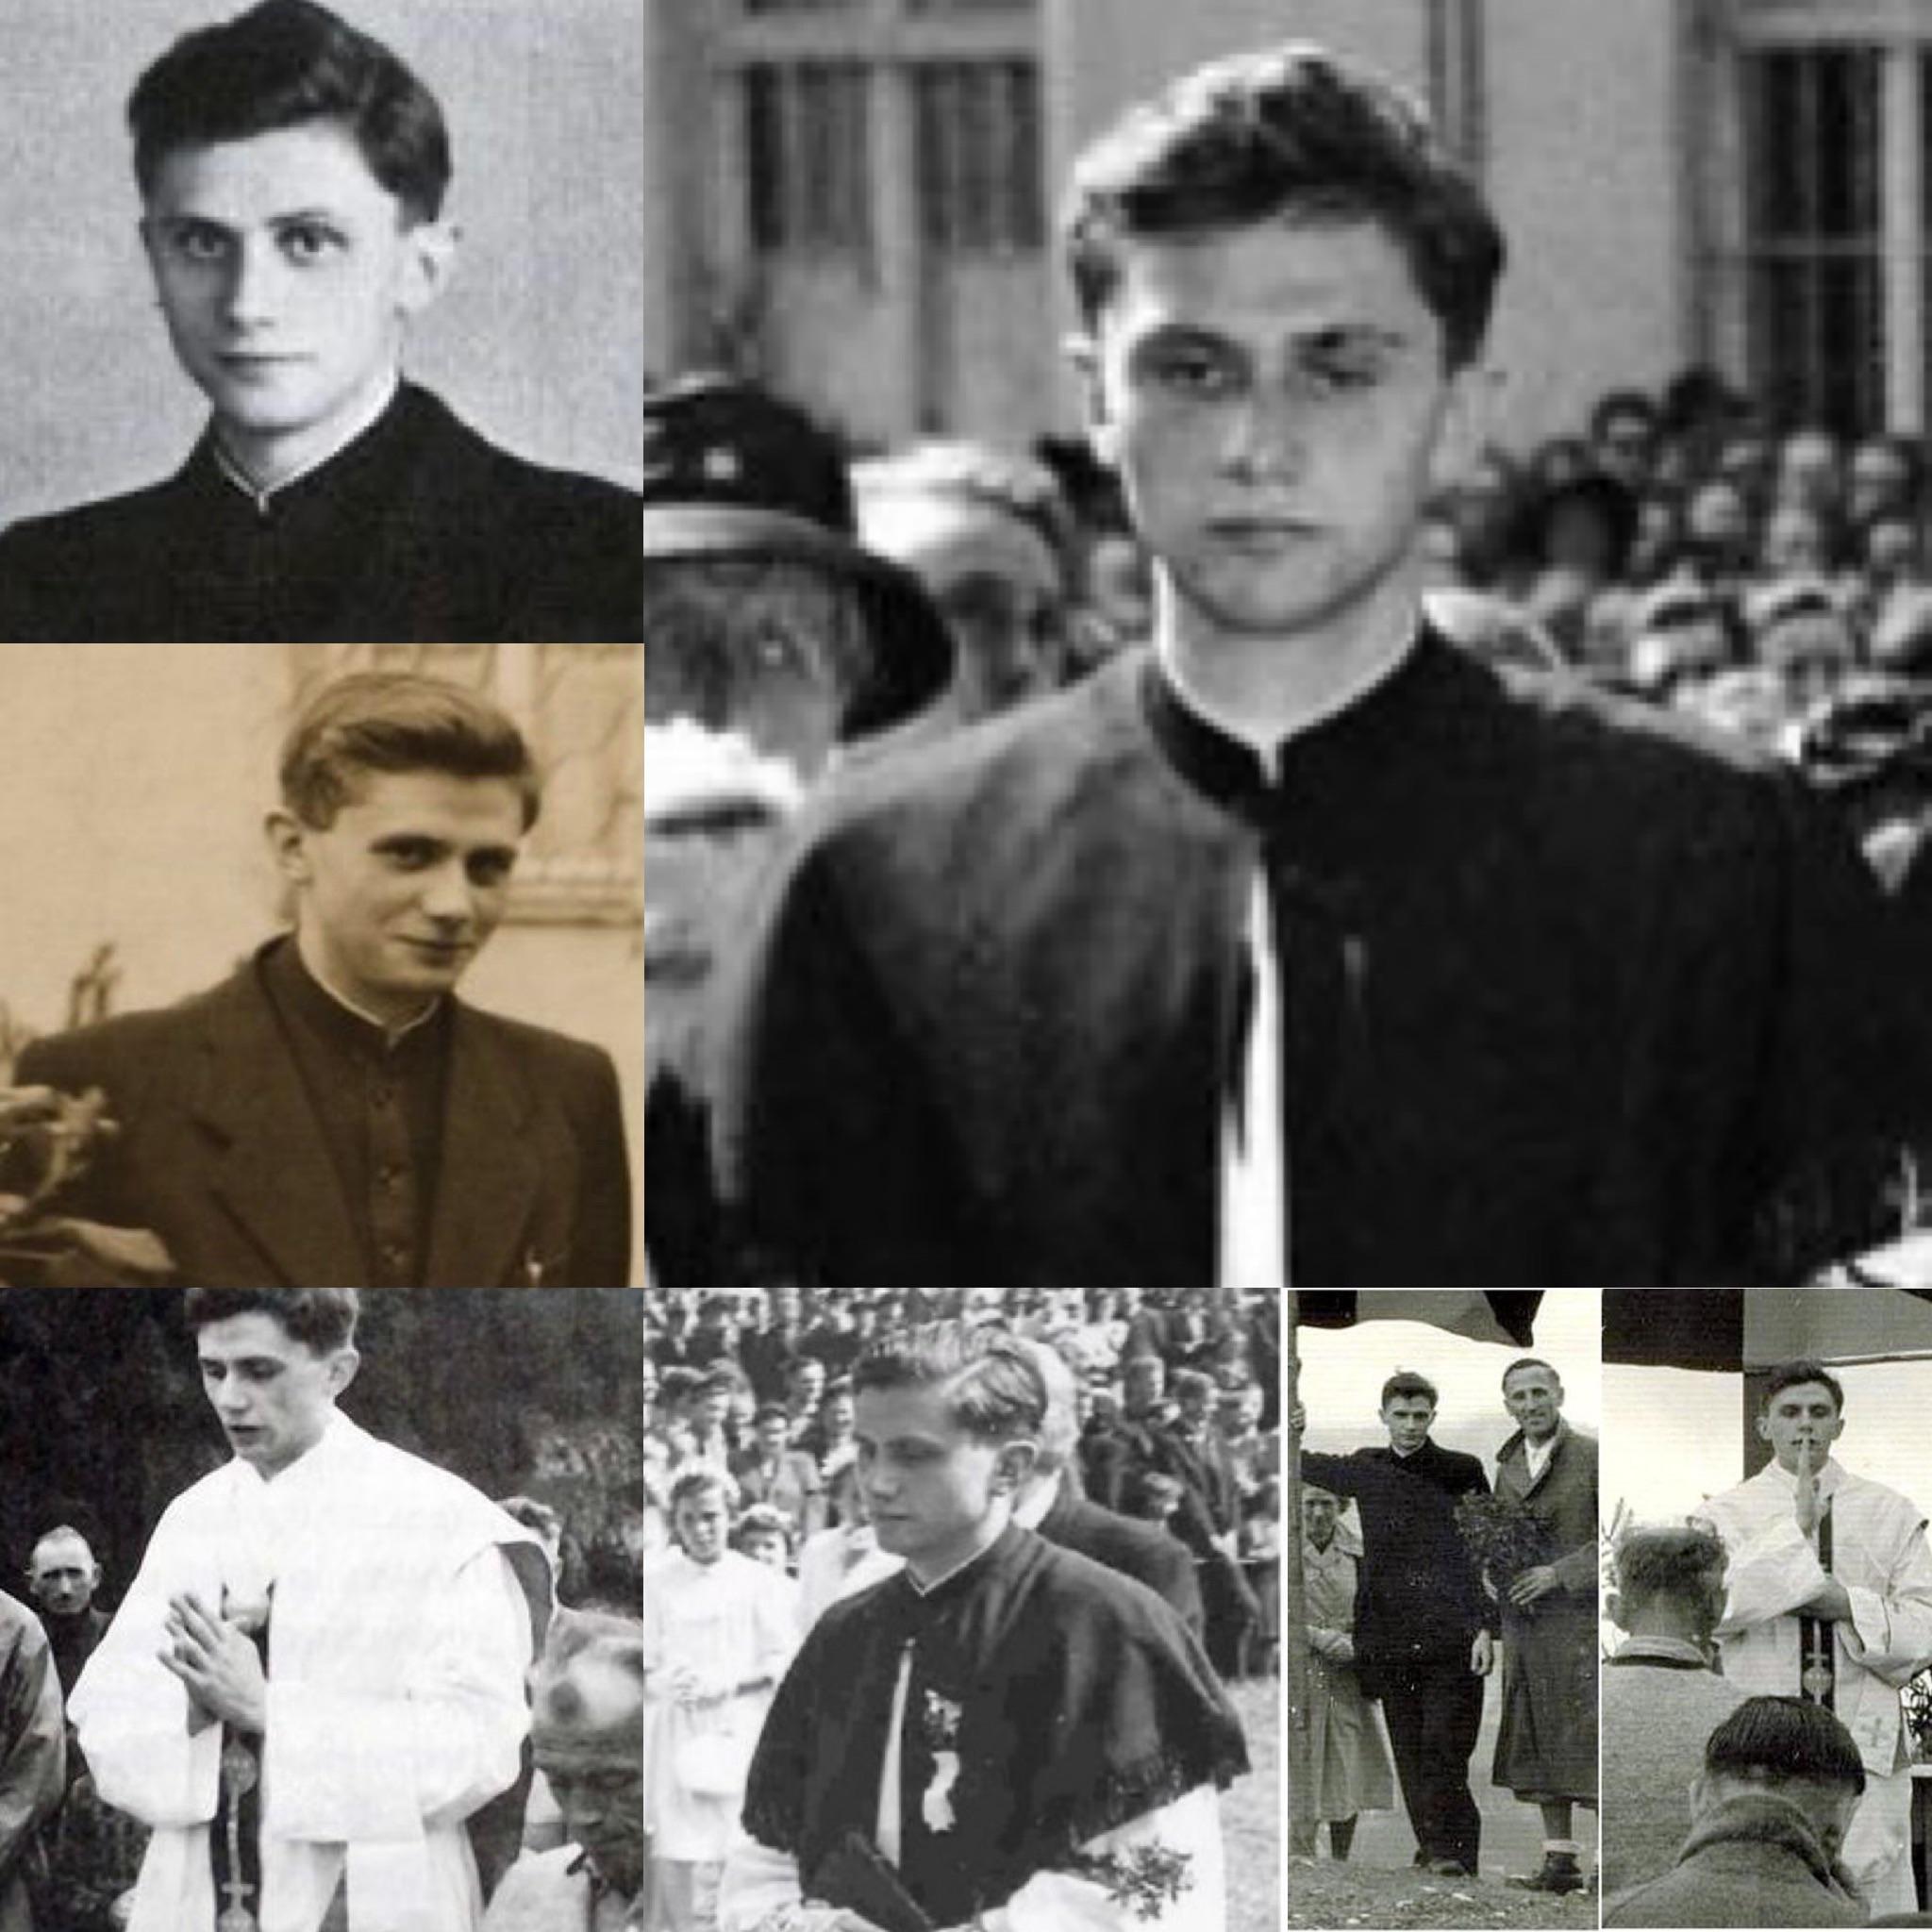 pope-emeritus-benedict-xvi-as-a-young-priest-many-decades-v0-zjl6auuvh6v91.jpg